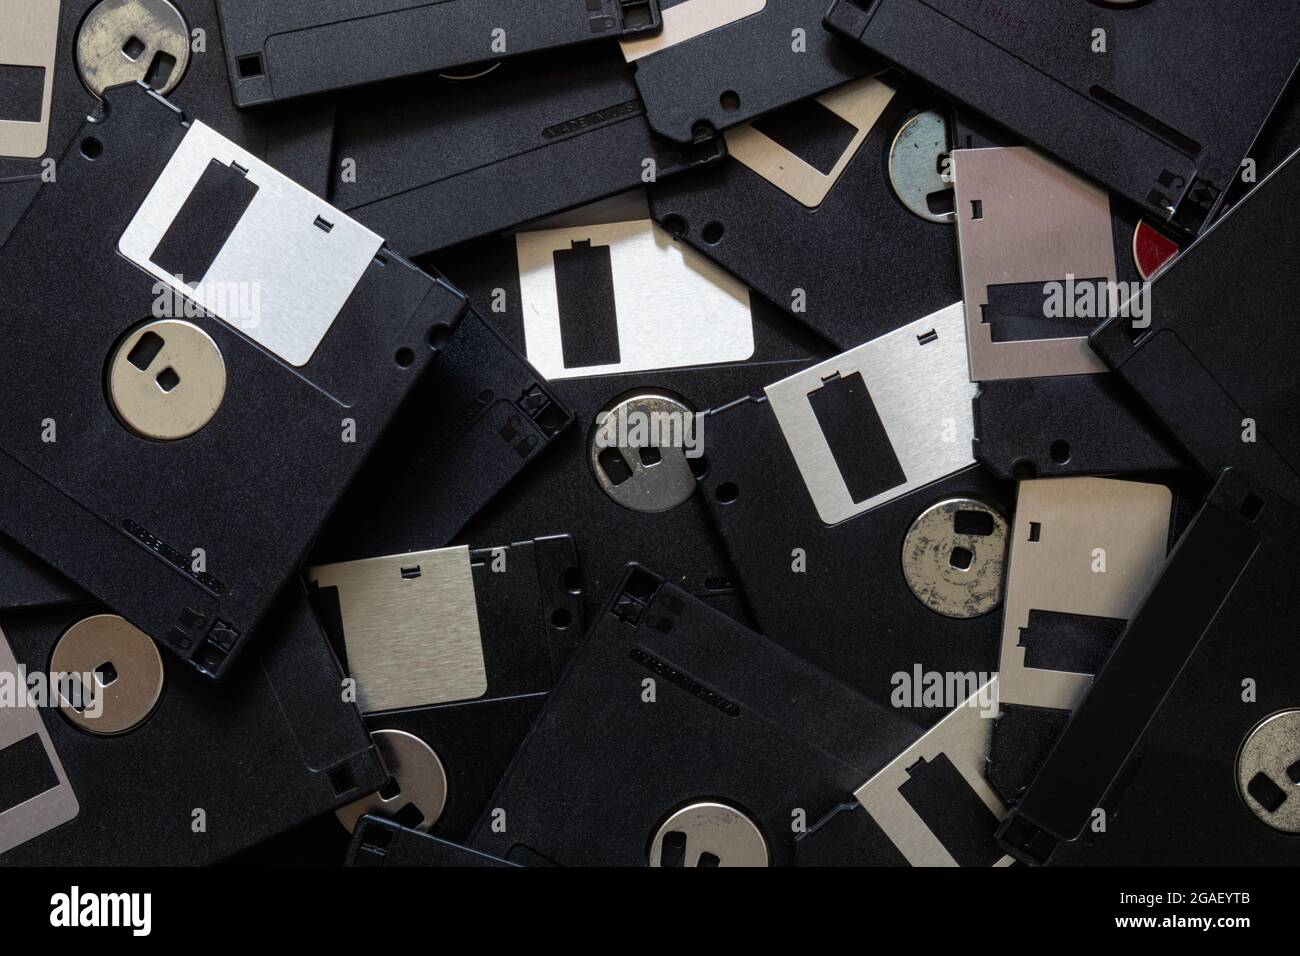 A square floppy disk is a magnetic disk for storing data in an old computer with a small capacity, but floppy disks were still popular in those days b Stock Photo